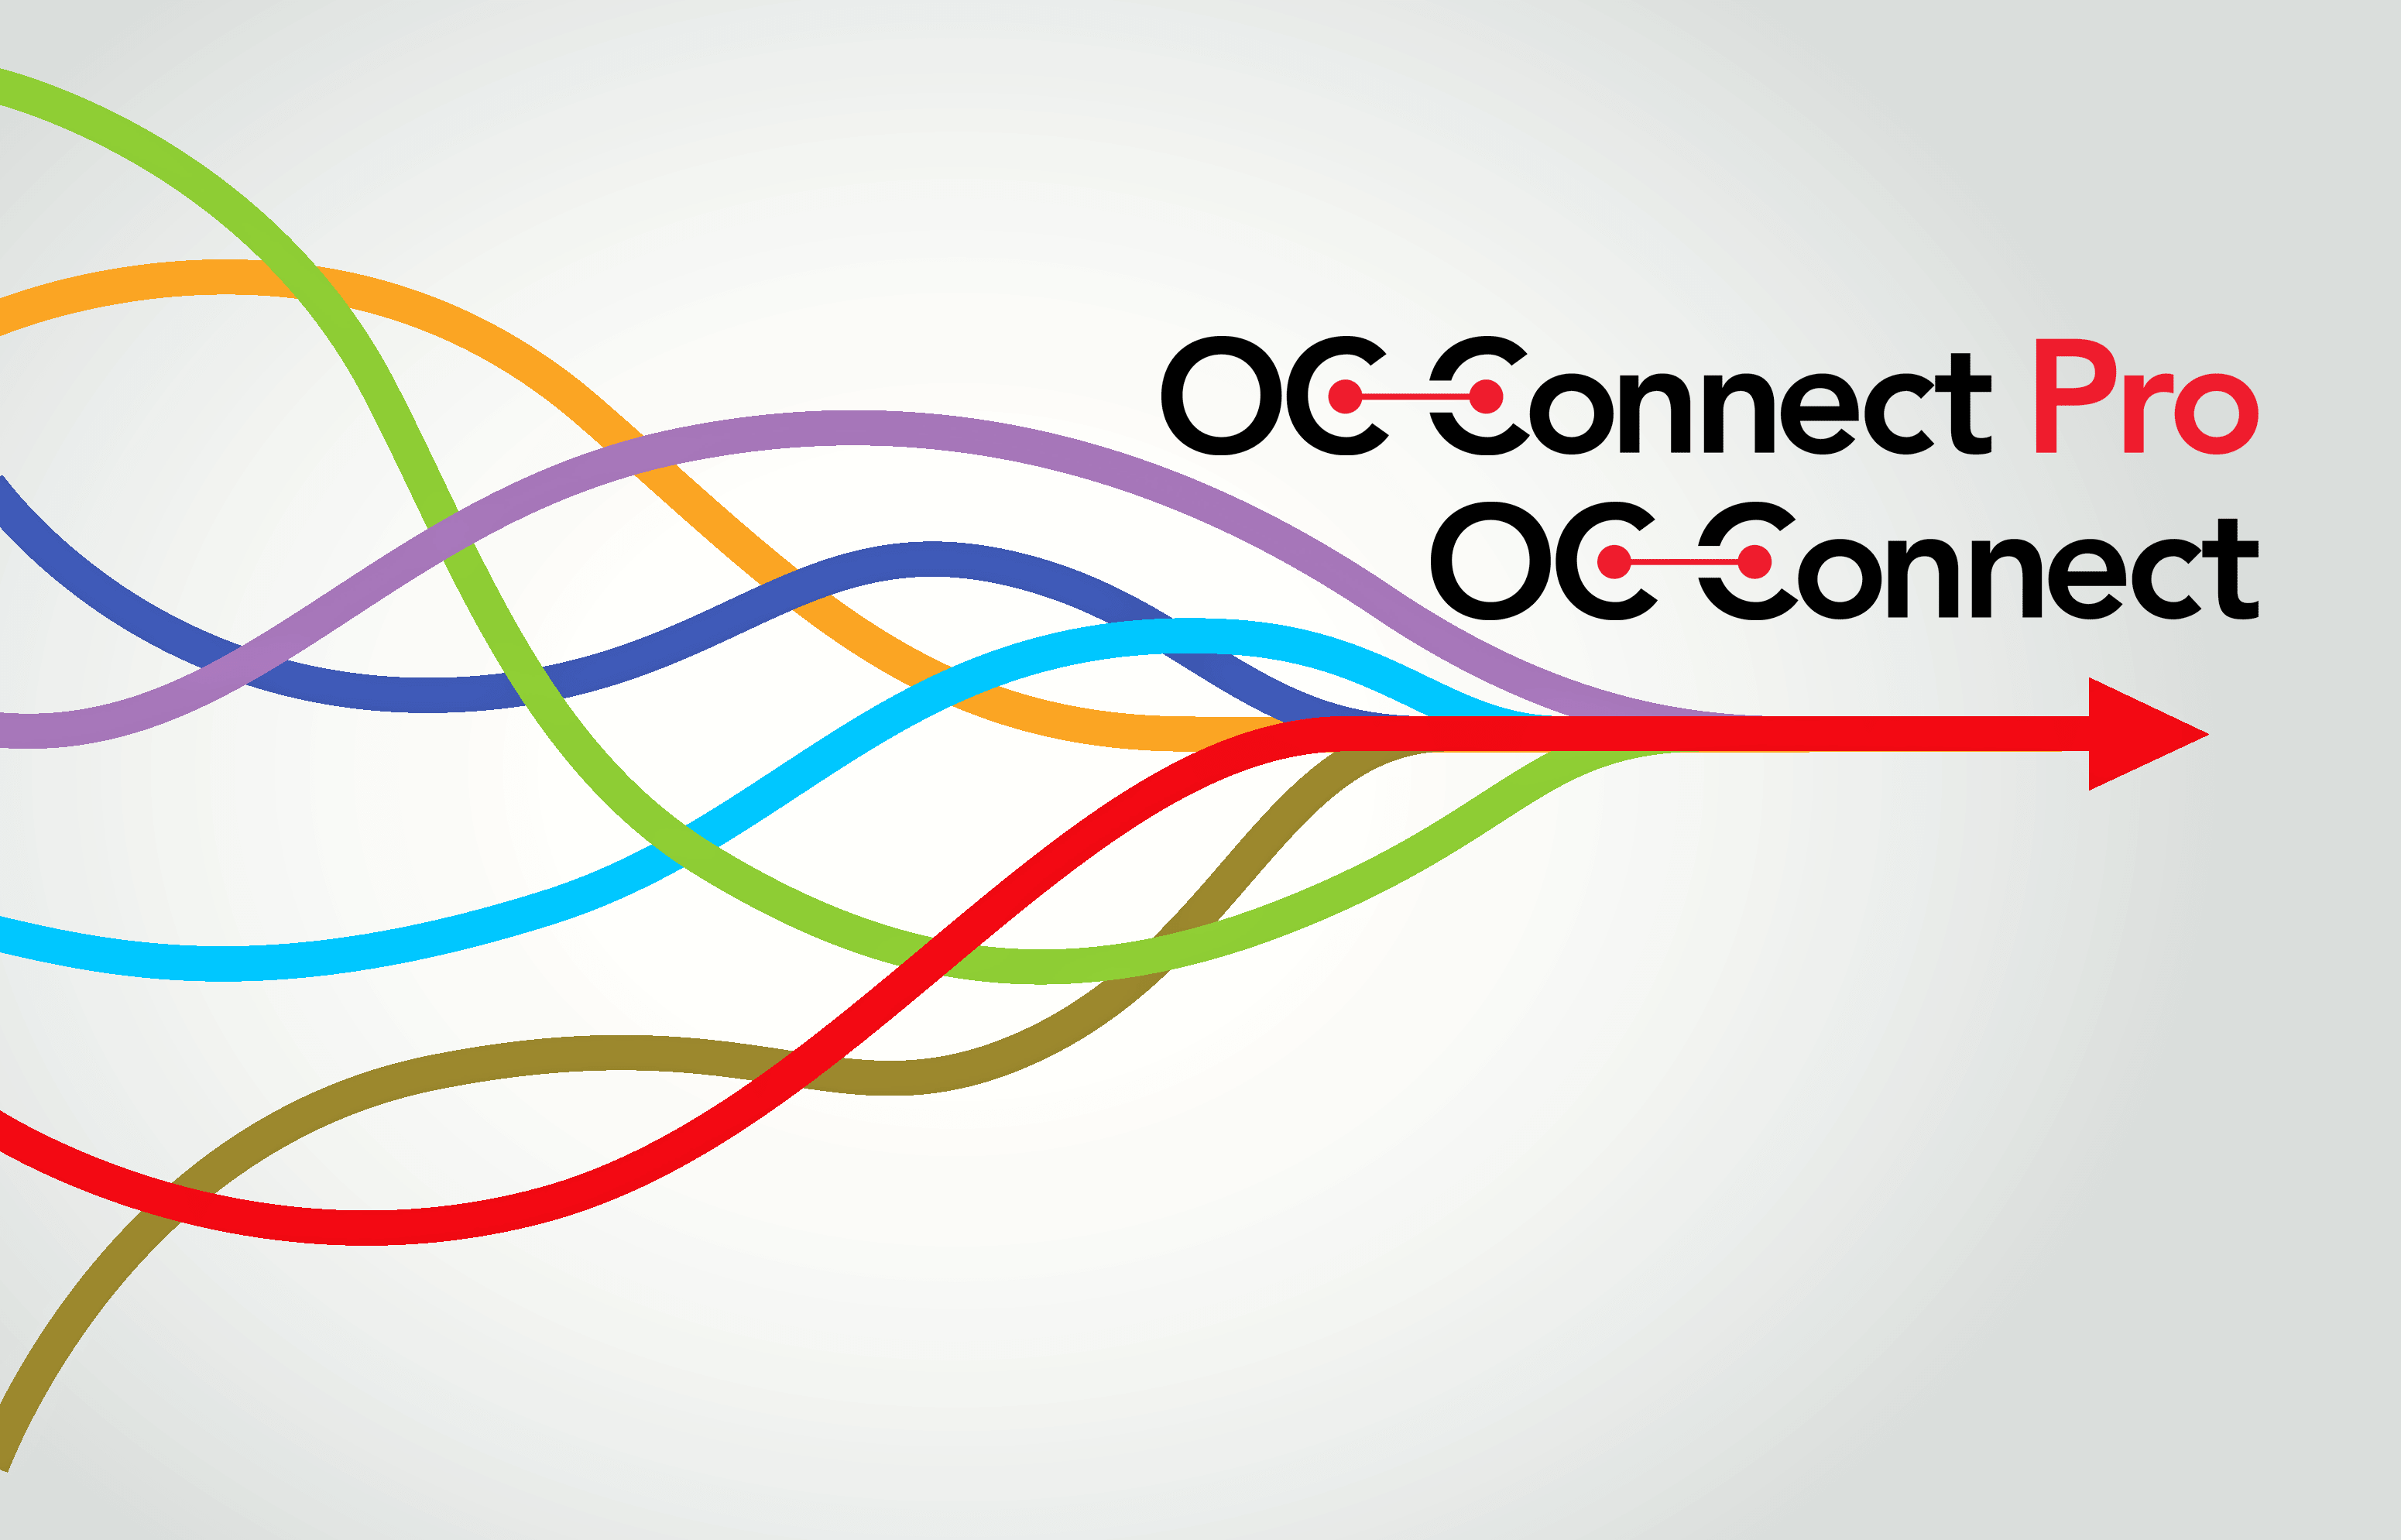 Graphic of multicolored wavy lines converging into a single red arrow pointing right, with the text "oc-connect pro oc-connect" overlaying the center.